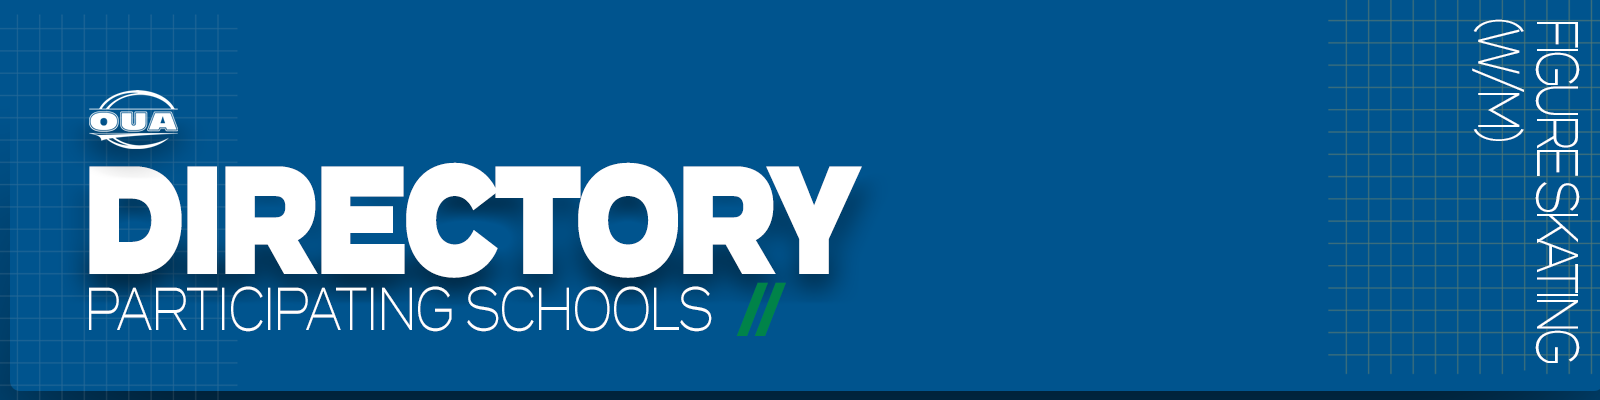 Predominantly blue graphic with large white text on the left side that reads 'Directory, Participating Schools' and small white vertical text on the right side that reads 'Figure Skating'